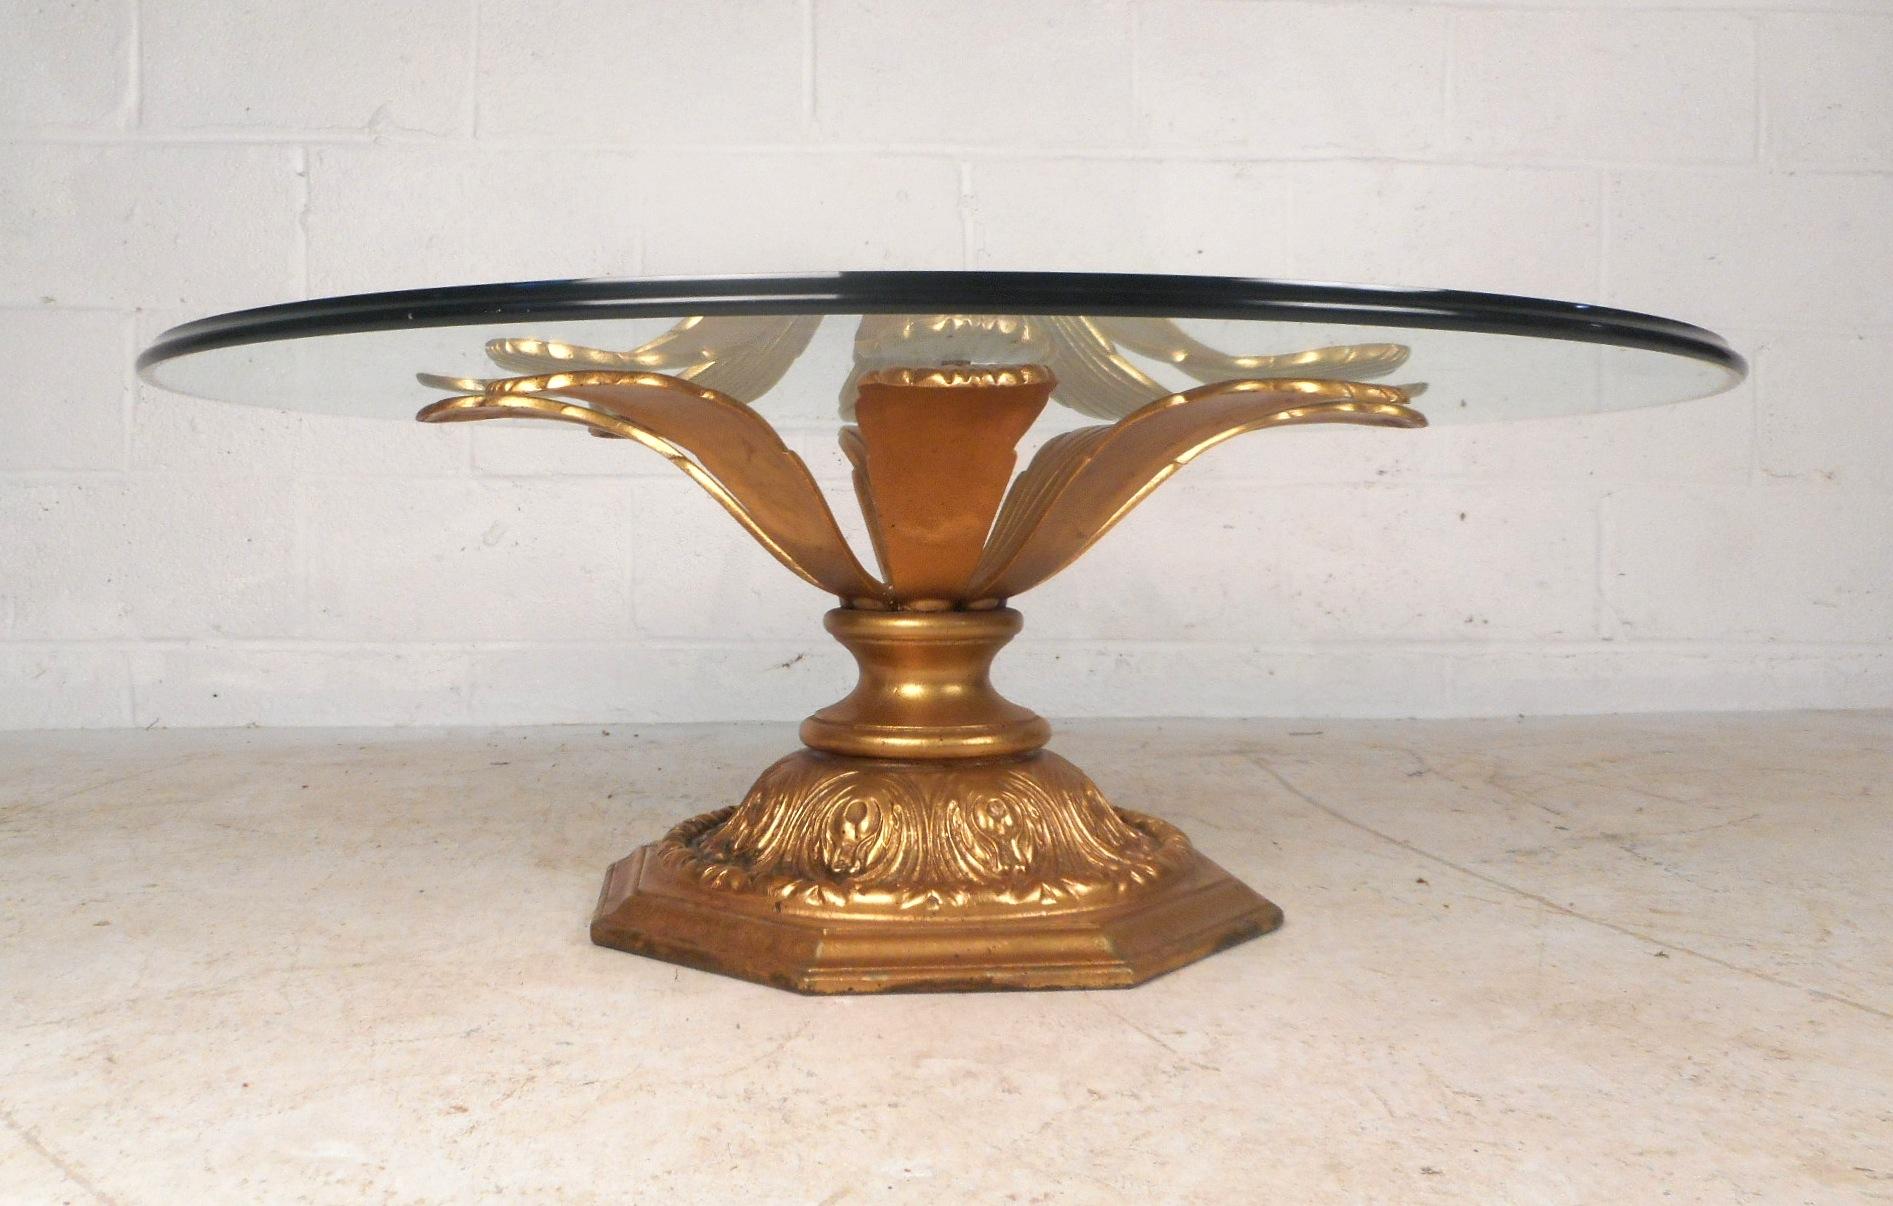 This stunning vintage Hollywood Regency style coffee table features a gilded metal base shaped like a blossoming flower. Wonderful design with a decorative octagonal base with interesting detail etched throughout. This impressive cocktail table